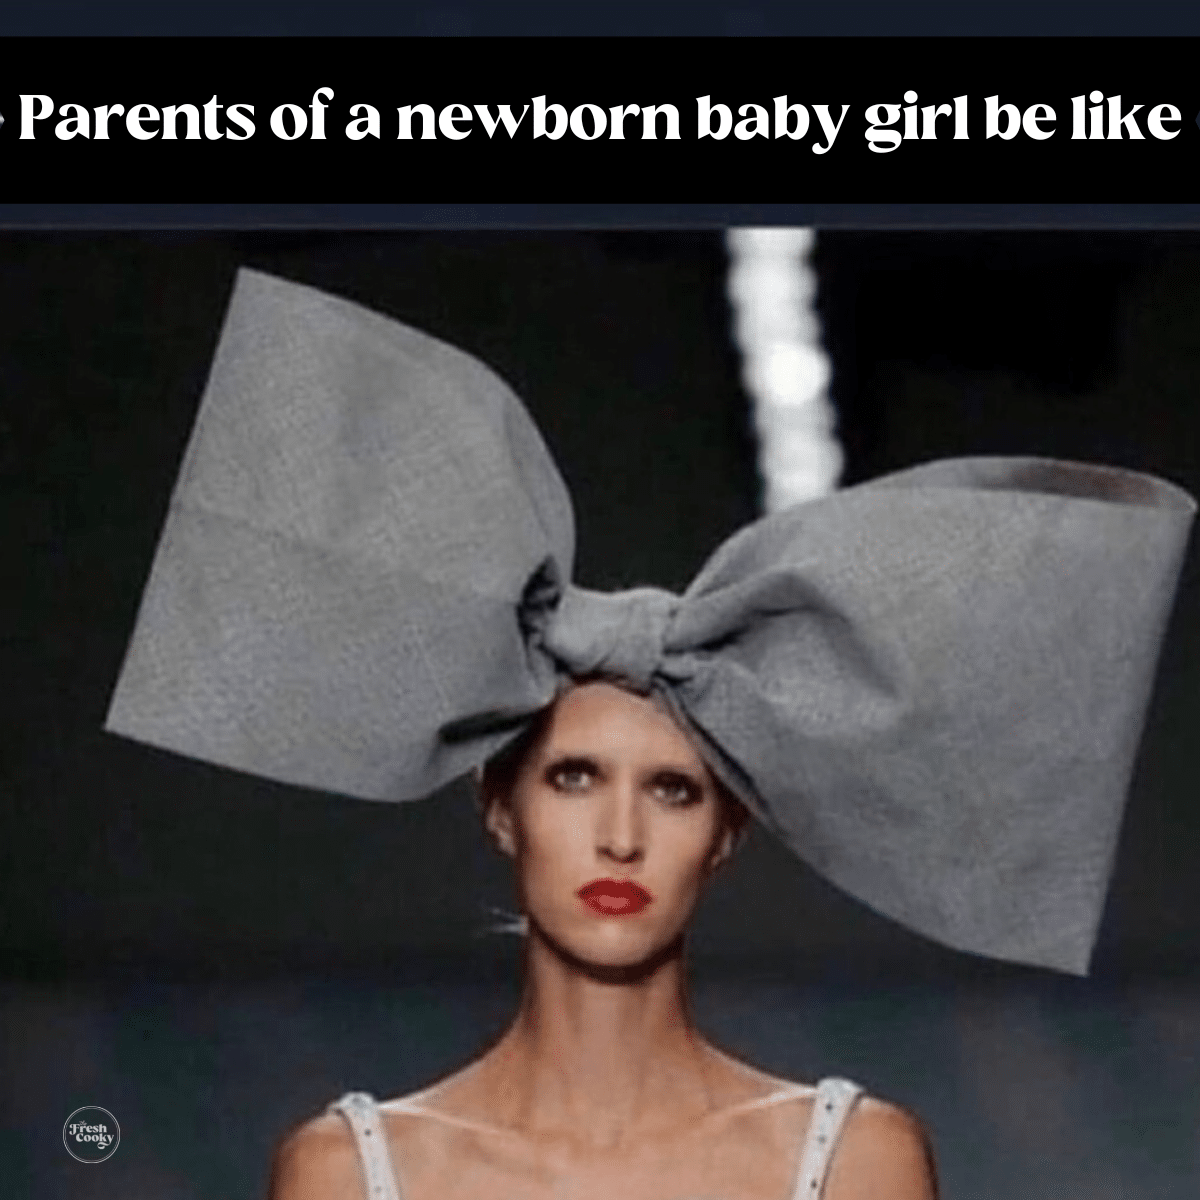 Parents of a baby girl be like, woman model with gigantic bow on her head.